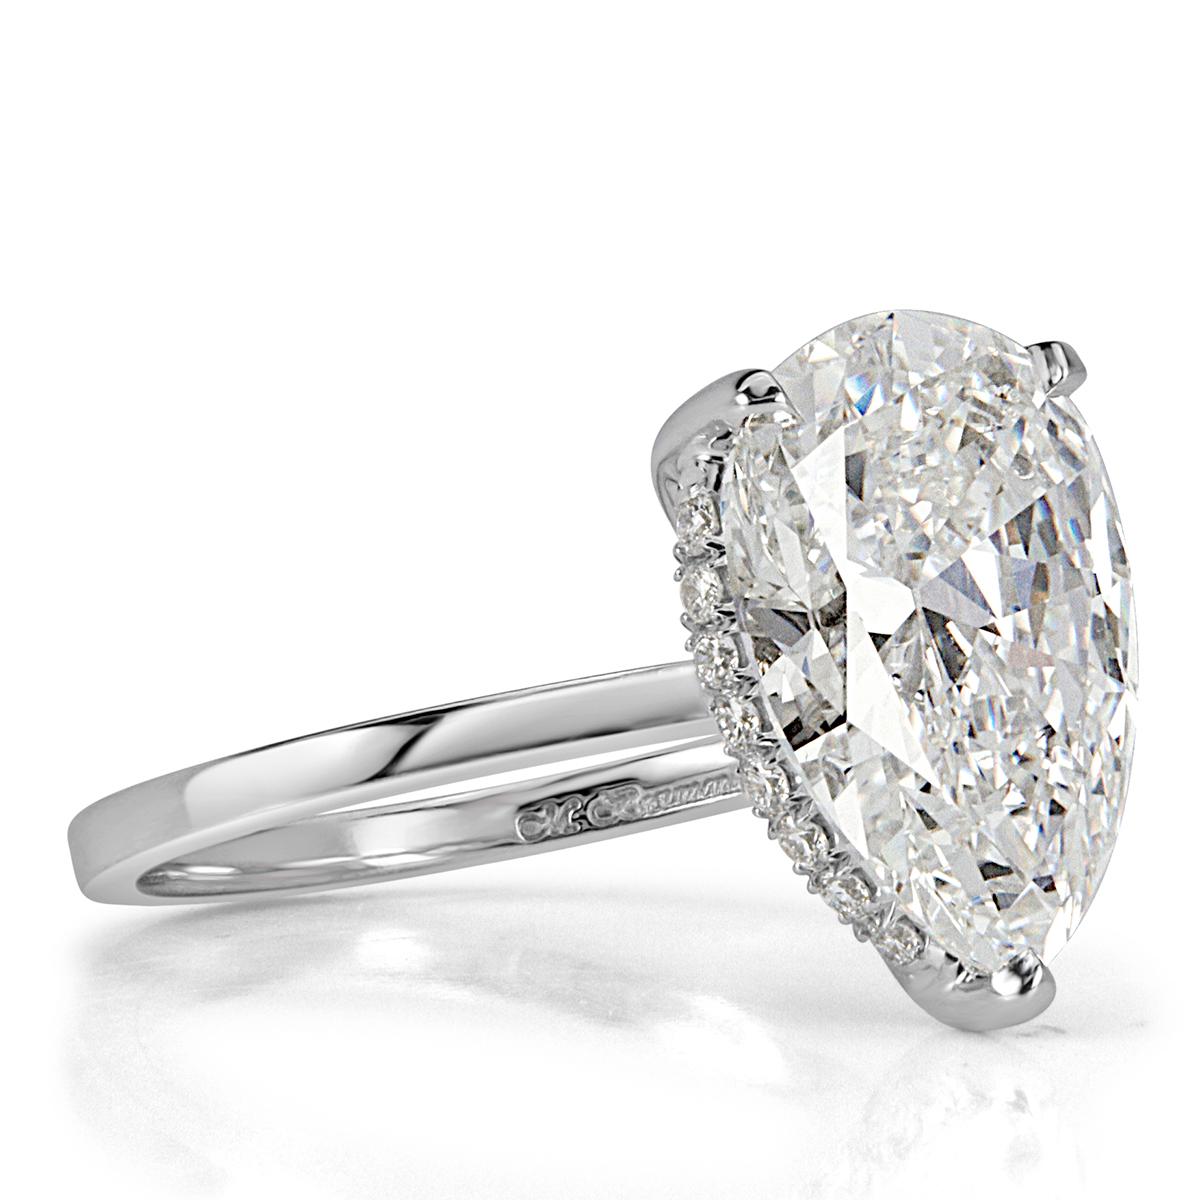 Absolutely breathtaking from every angle, this stunning diamond engagement ring features a mesmerizing 4.73ct pear shaped center diamond, GIA certified at G-VS1. For added sparkle, it is wrapped in an underlying halo of round brilliant cut diamonds